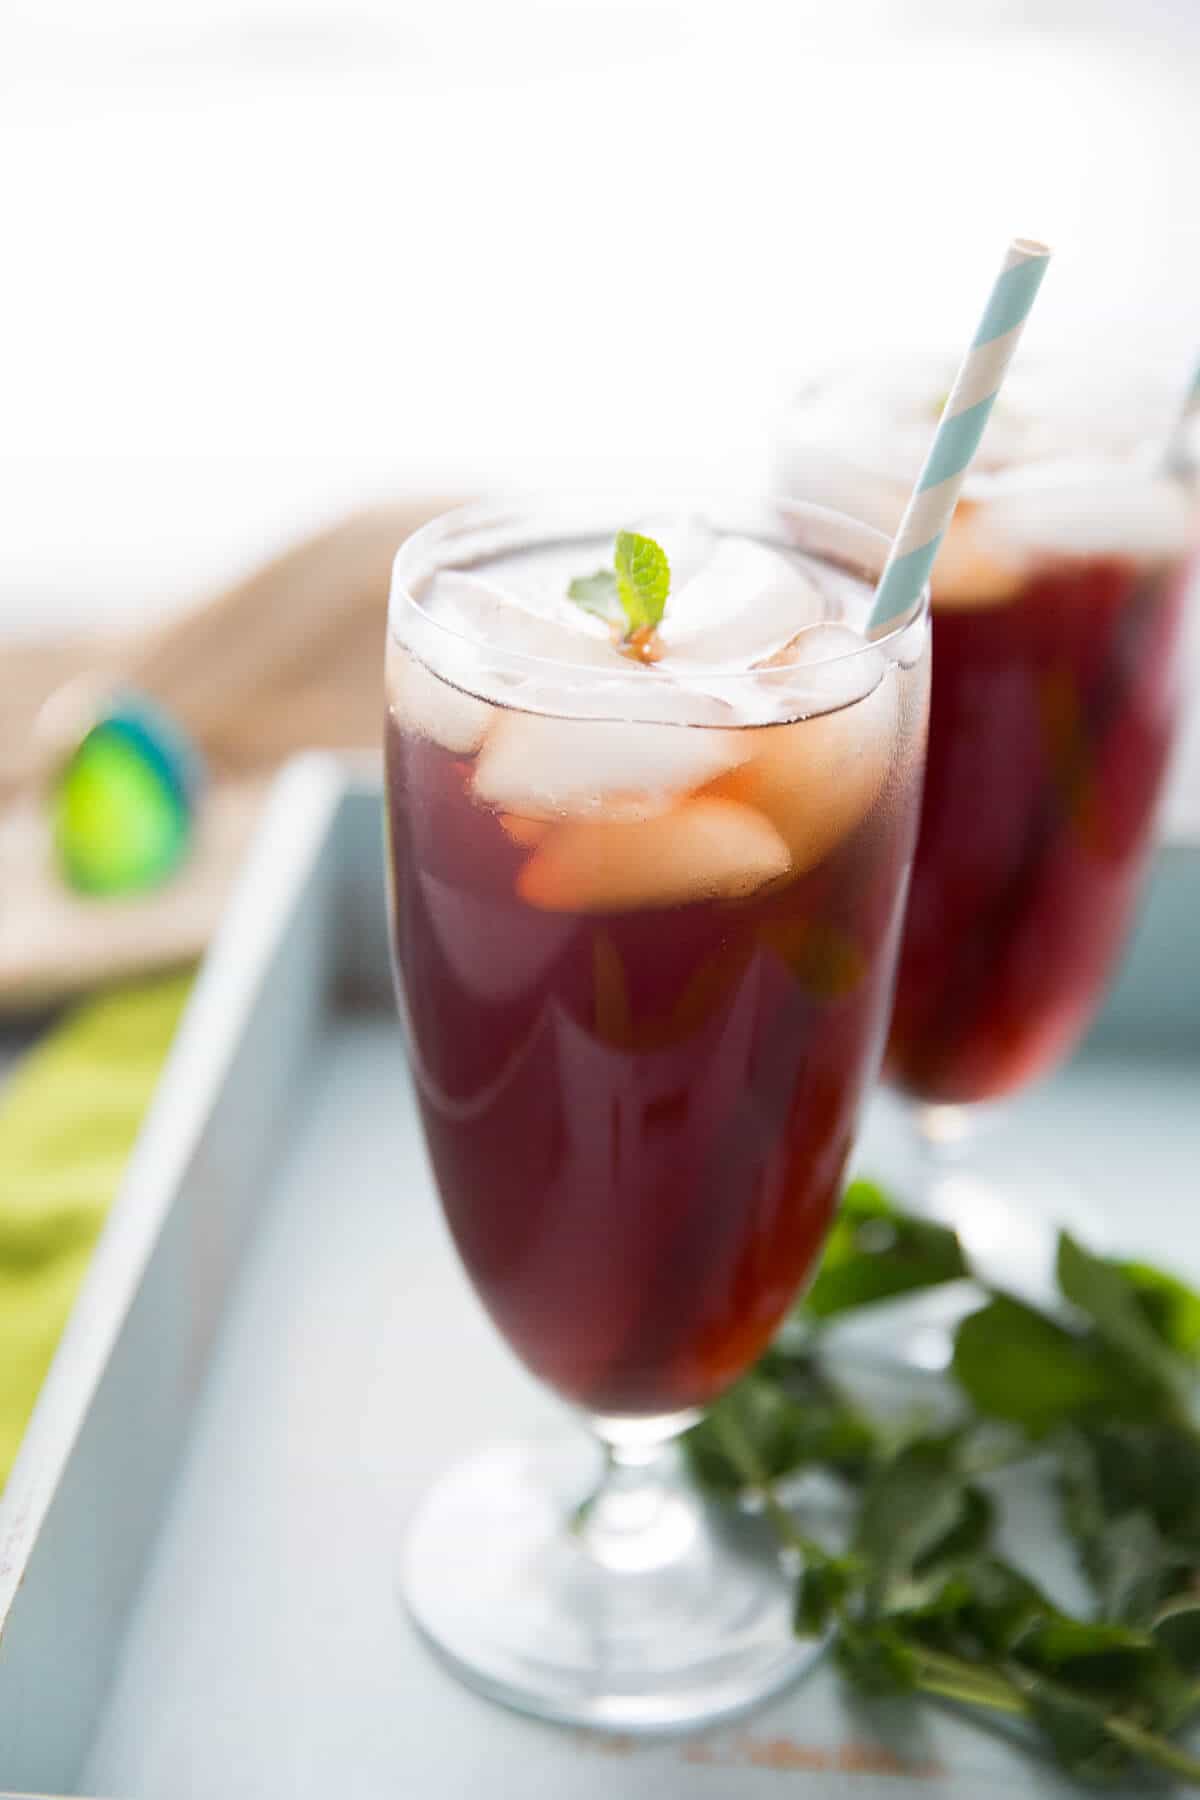 Iced tea is a must in the summertime, you have to try this simple pomegranate green tea recipe!